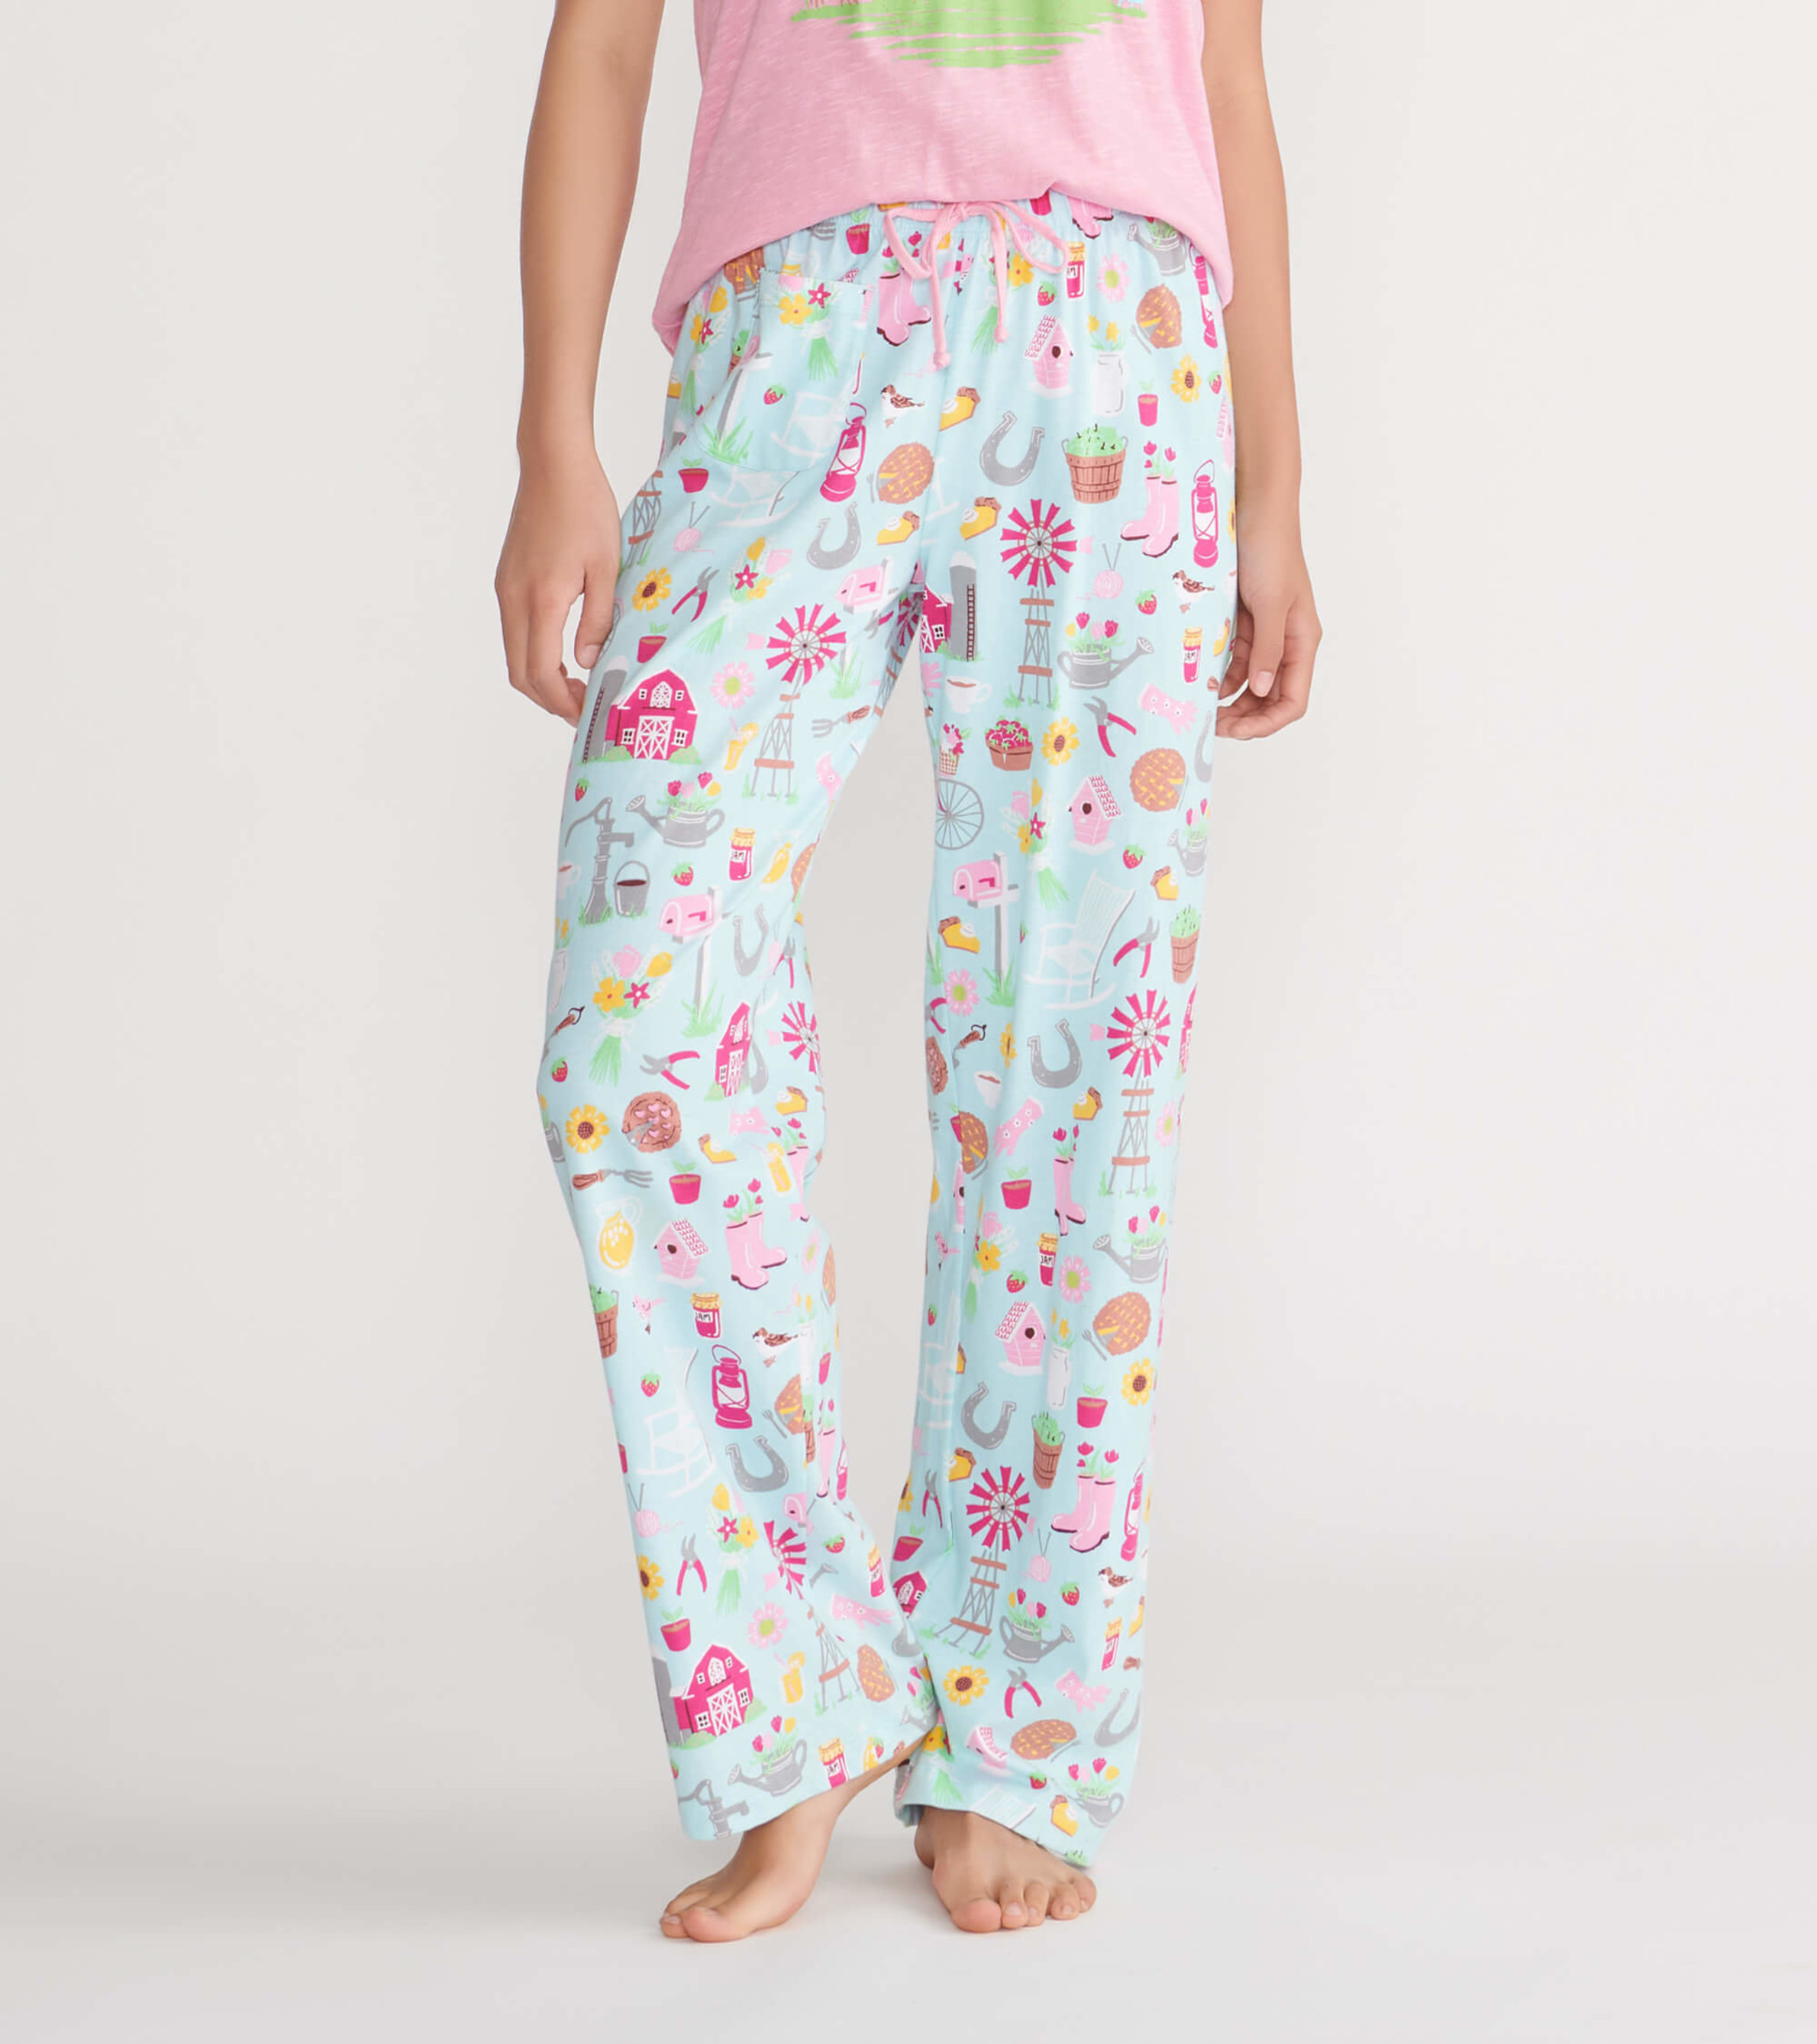 Country Living Women's Tee and Pants Pajama Separates - Little